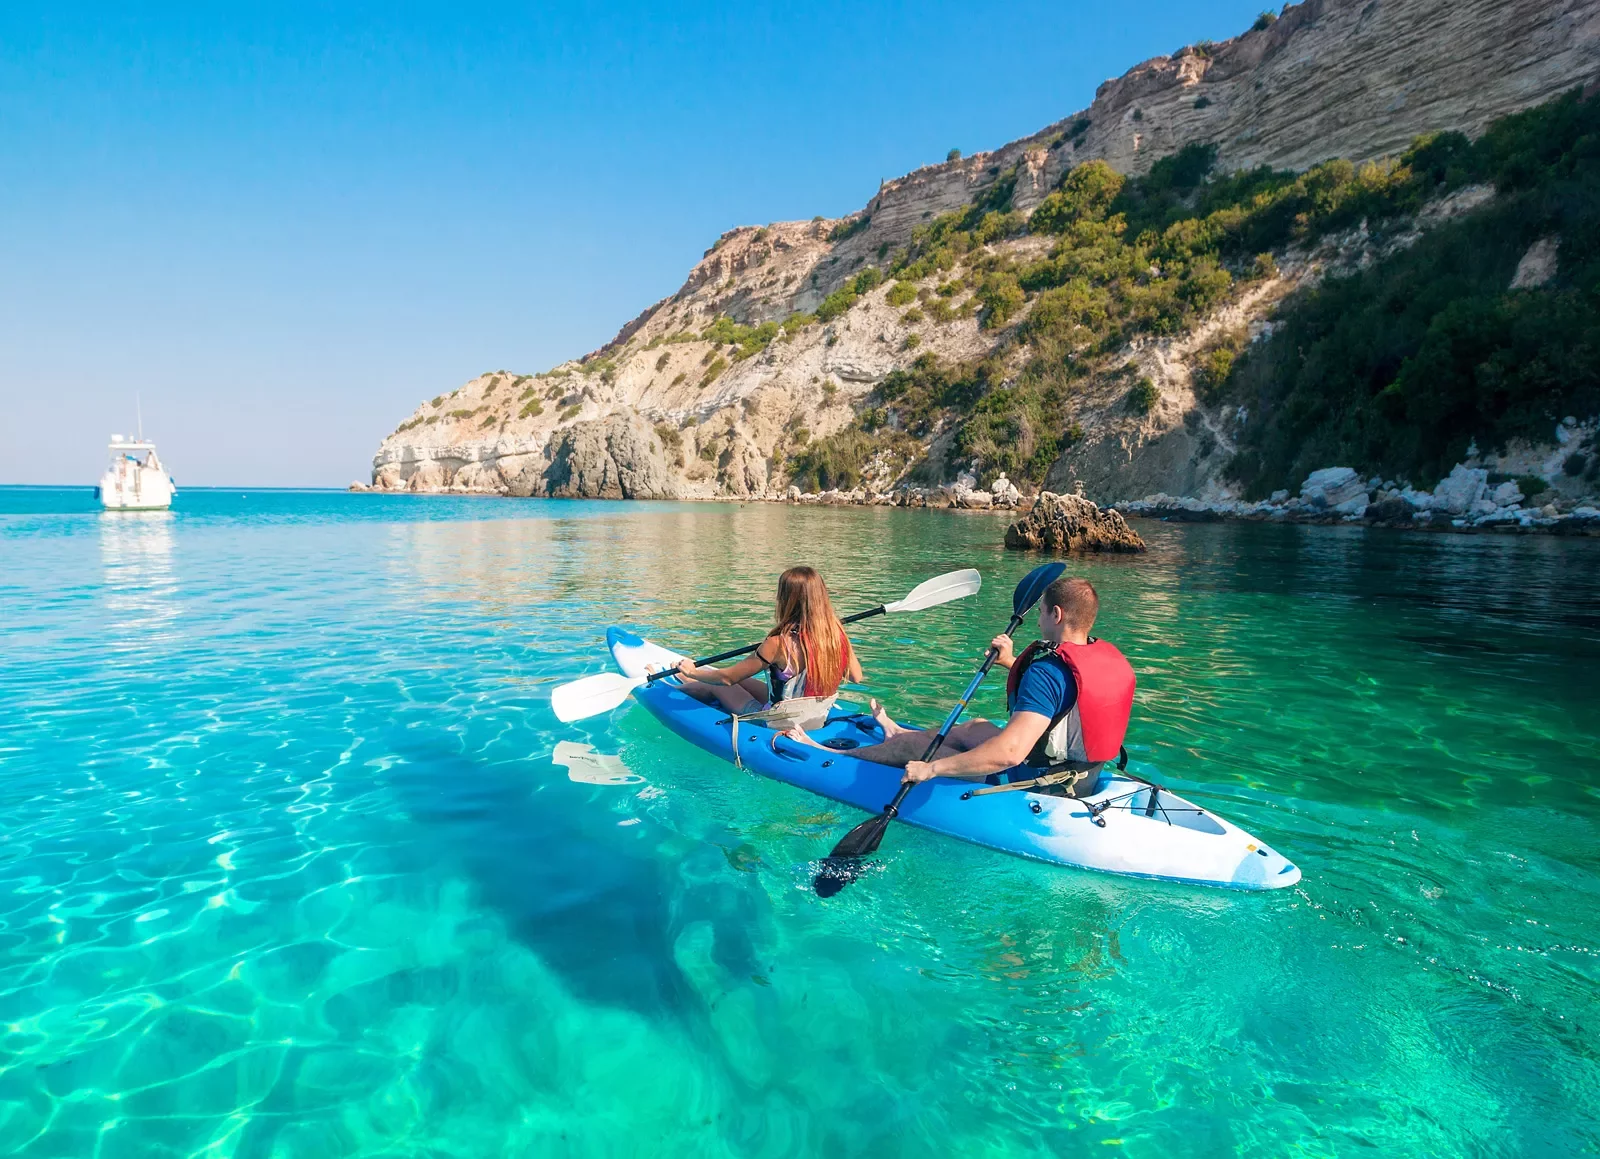 Two people kayaking in clear blue water